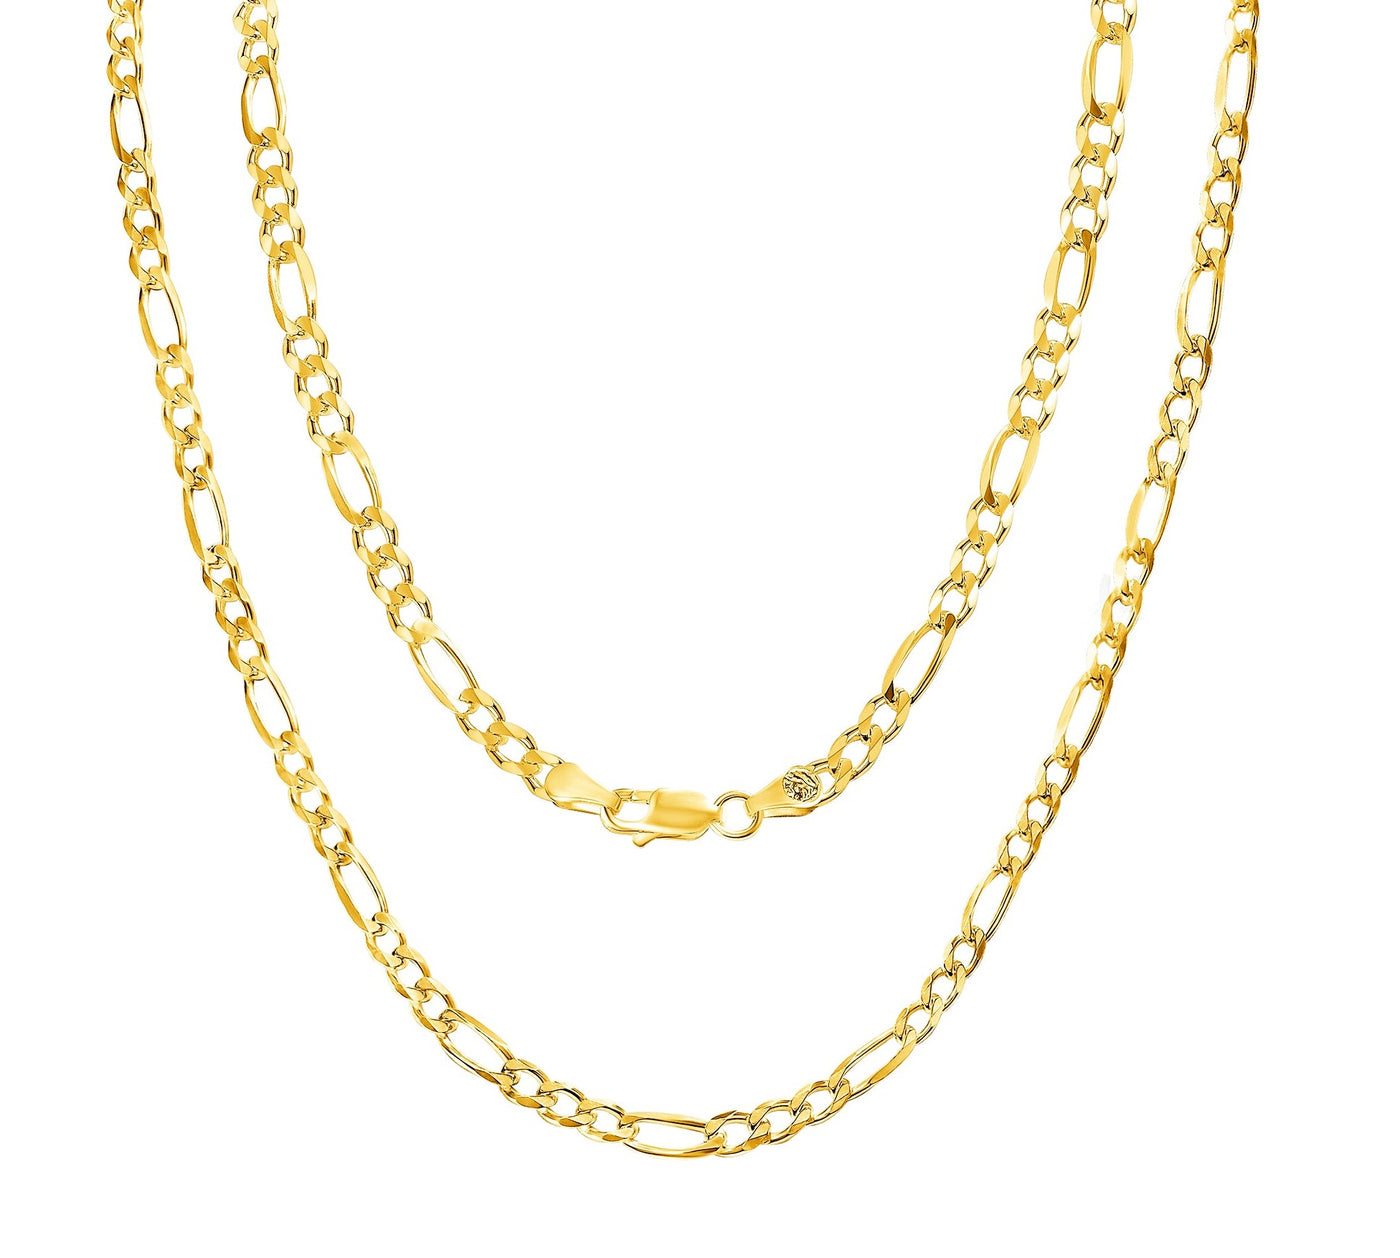 Solid 14K Yellow Gold 3 mm-7.5 mm Figaro Link Chain Necklace 16"-26"